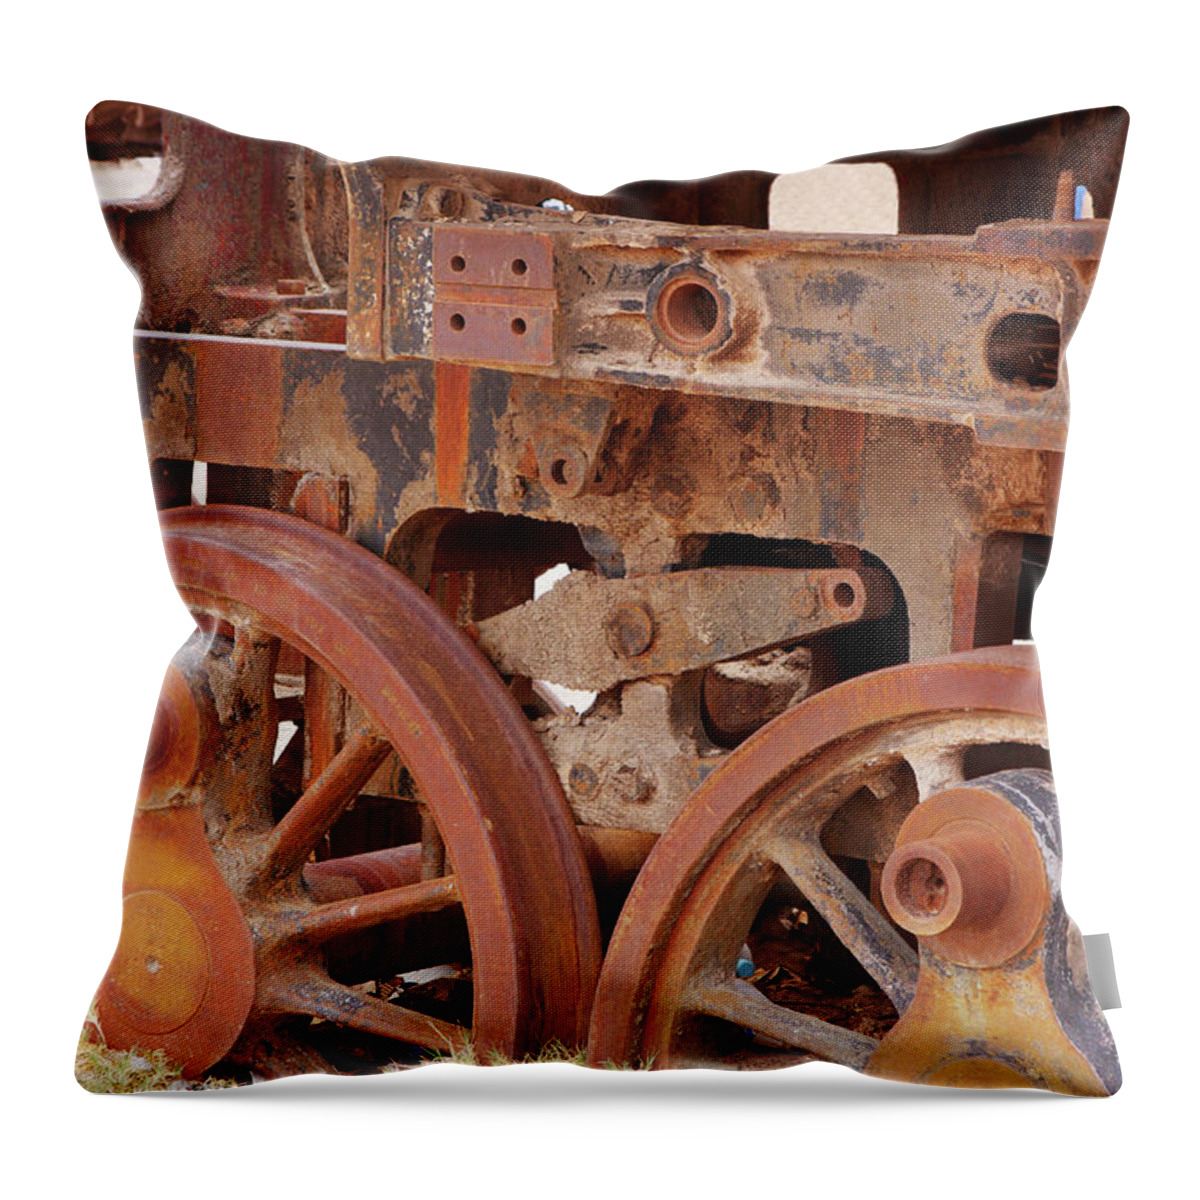 Rusty Throw Pillow featuring the photograph Locomotive In The Desert by Aidan Moran